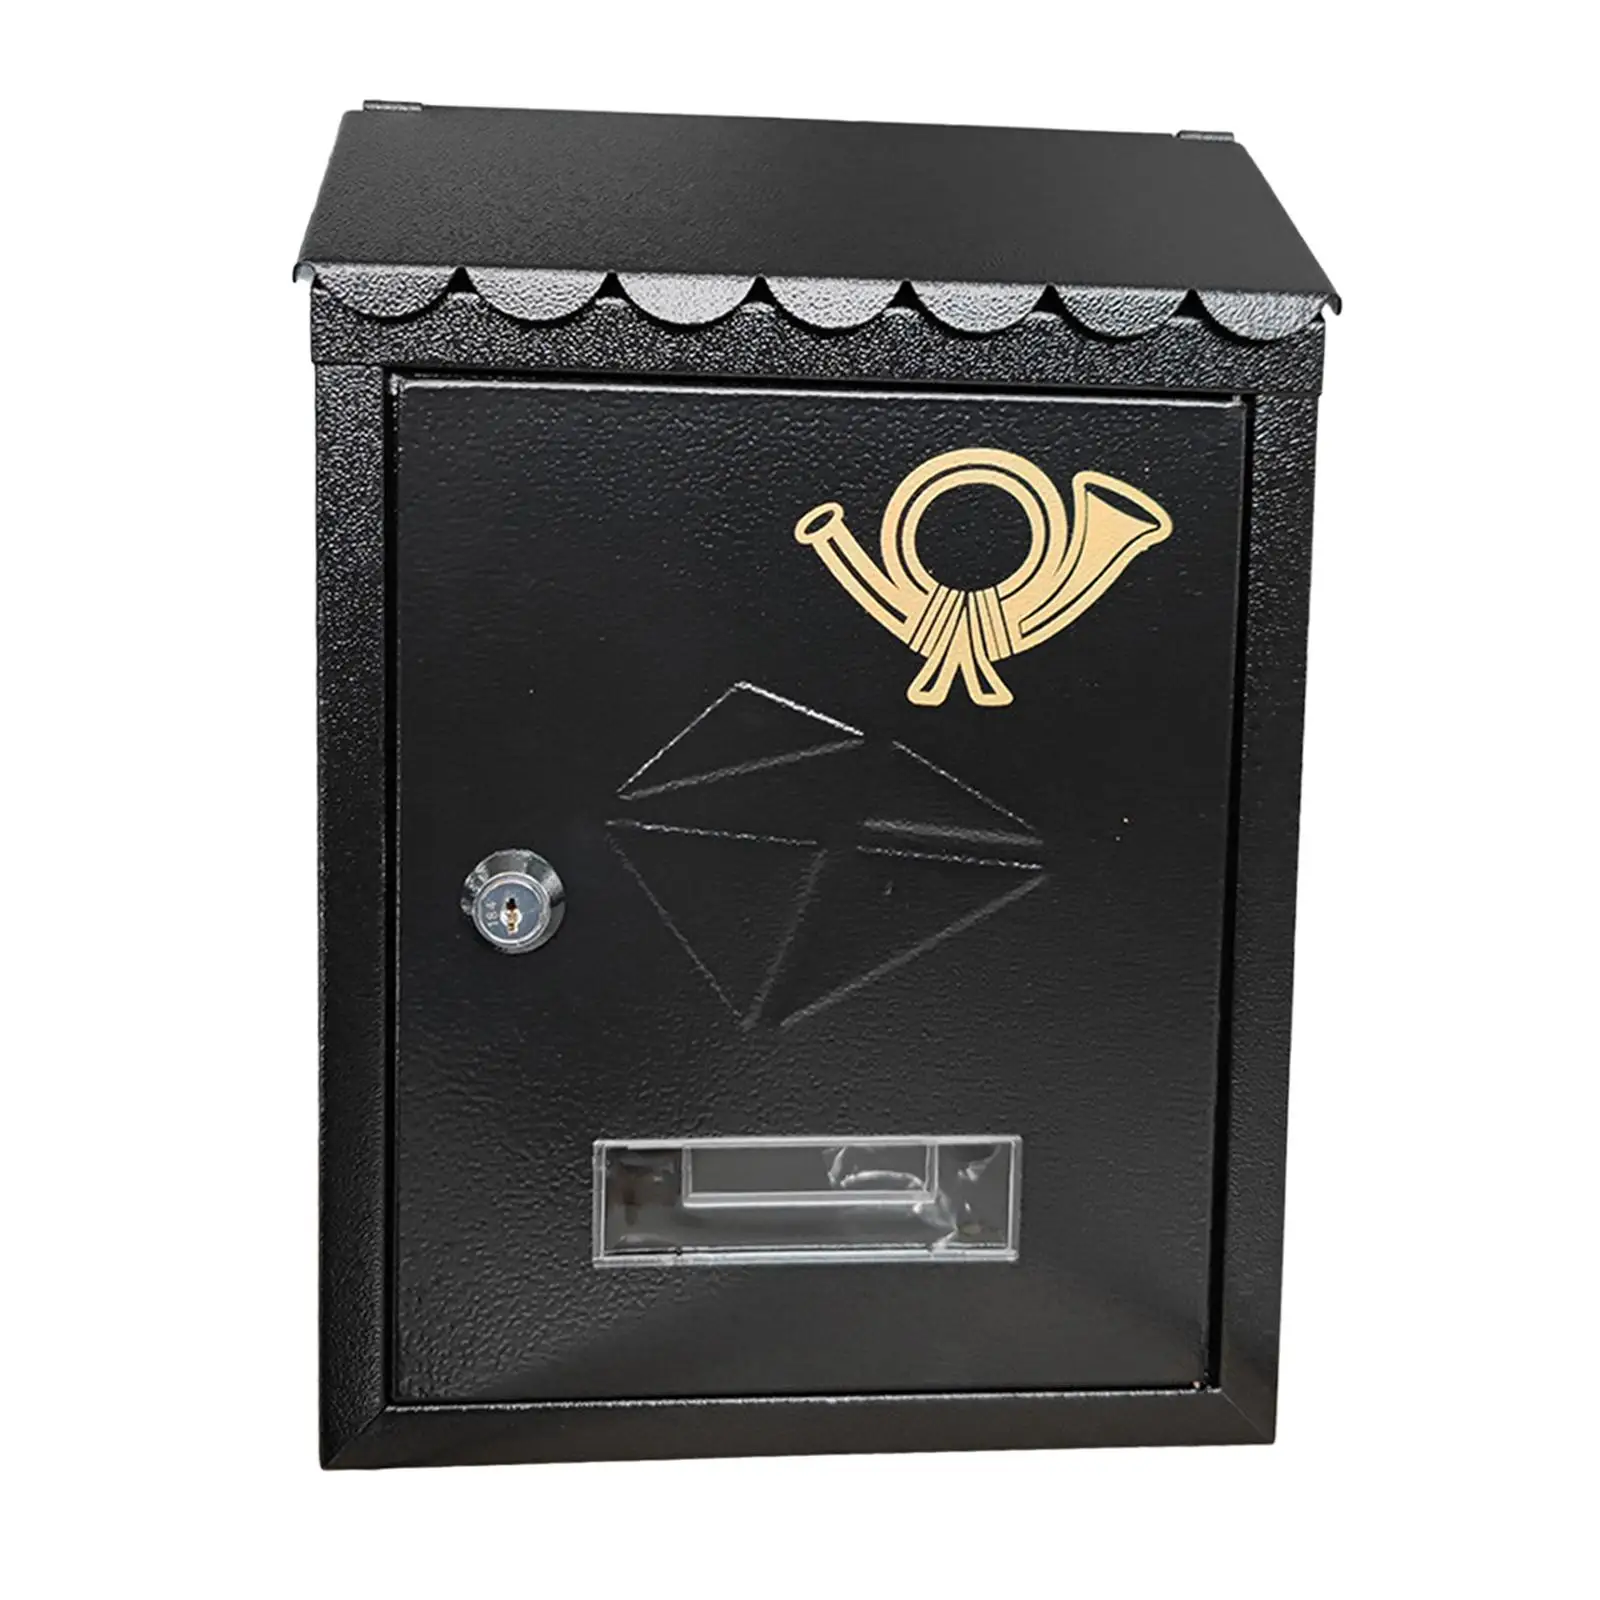 Wall Mount Mailbox Commercial Use Locking Front Door Outdoor Business Decor Iron Porch 21.5x7x30cm Post Box Letterbox Mailboxes